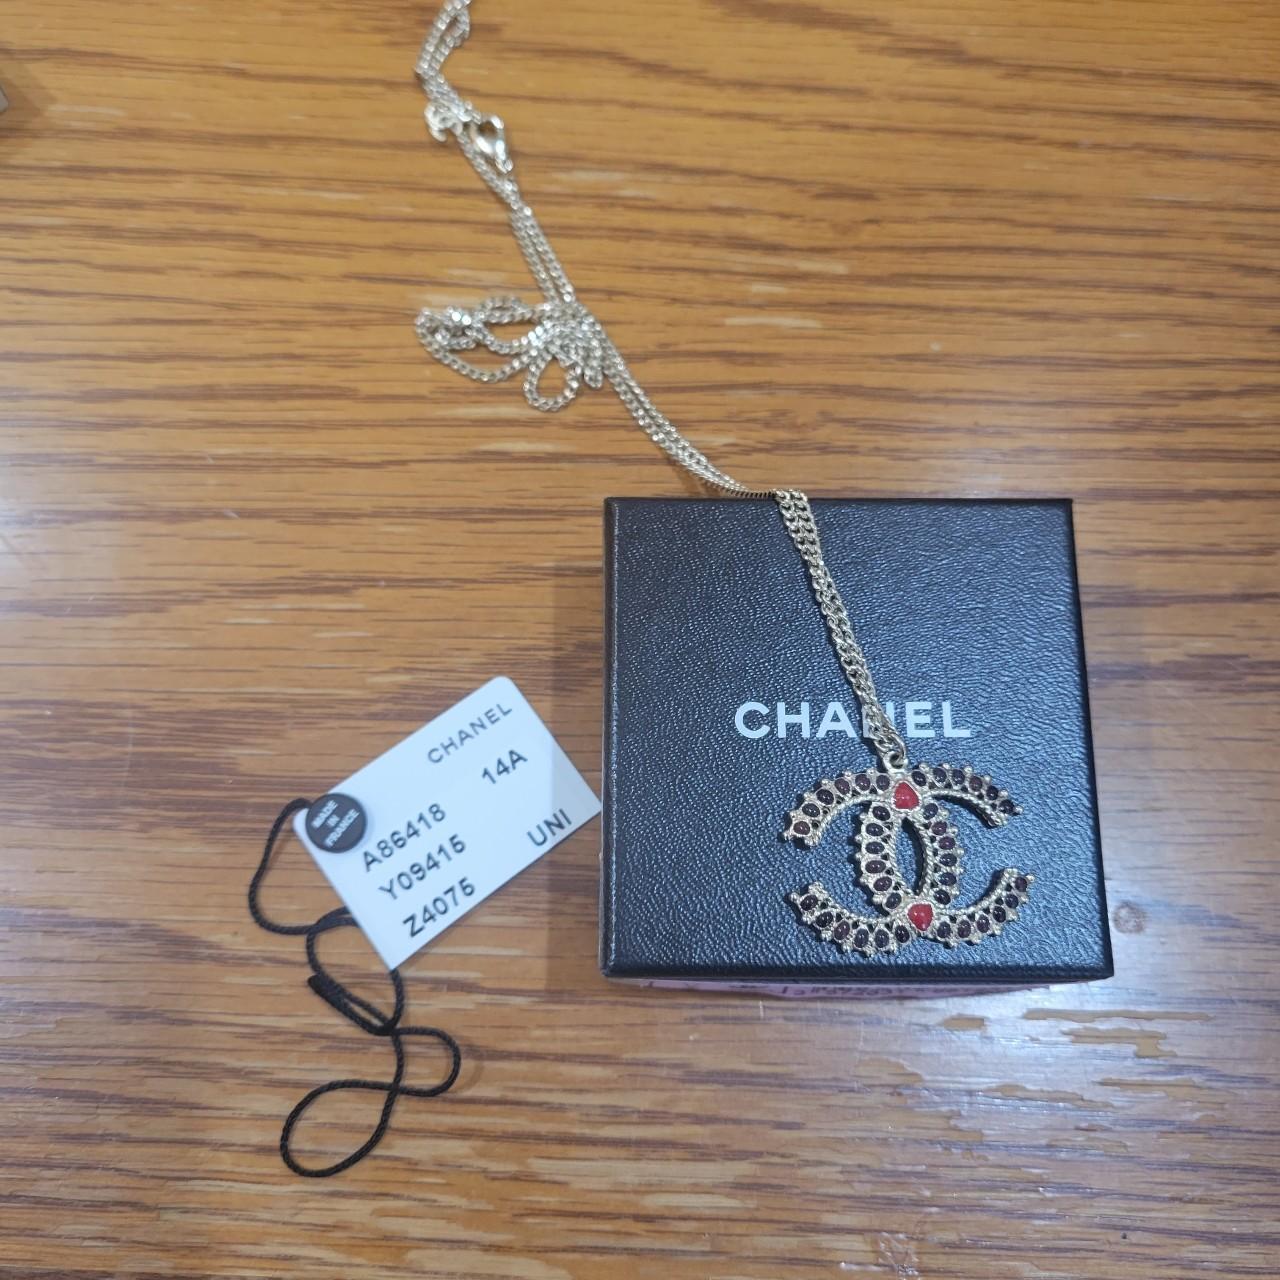 A beautiful Chanel double C necklace from the 2014